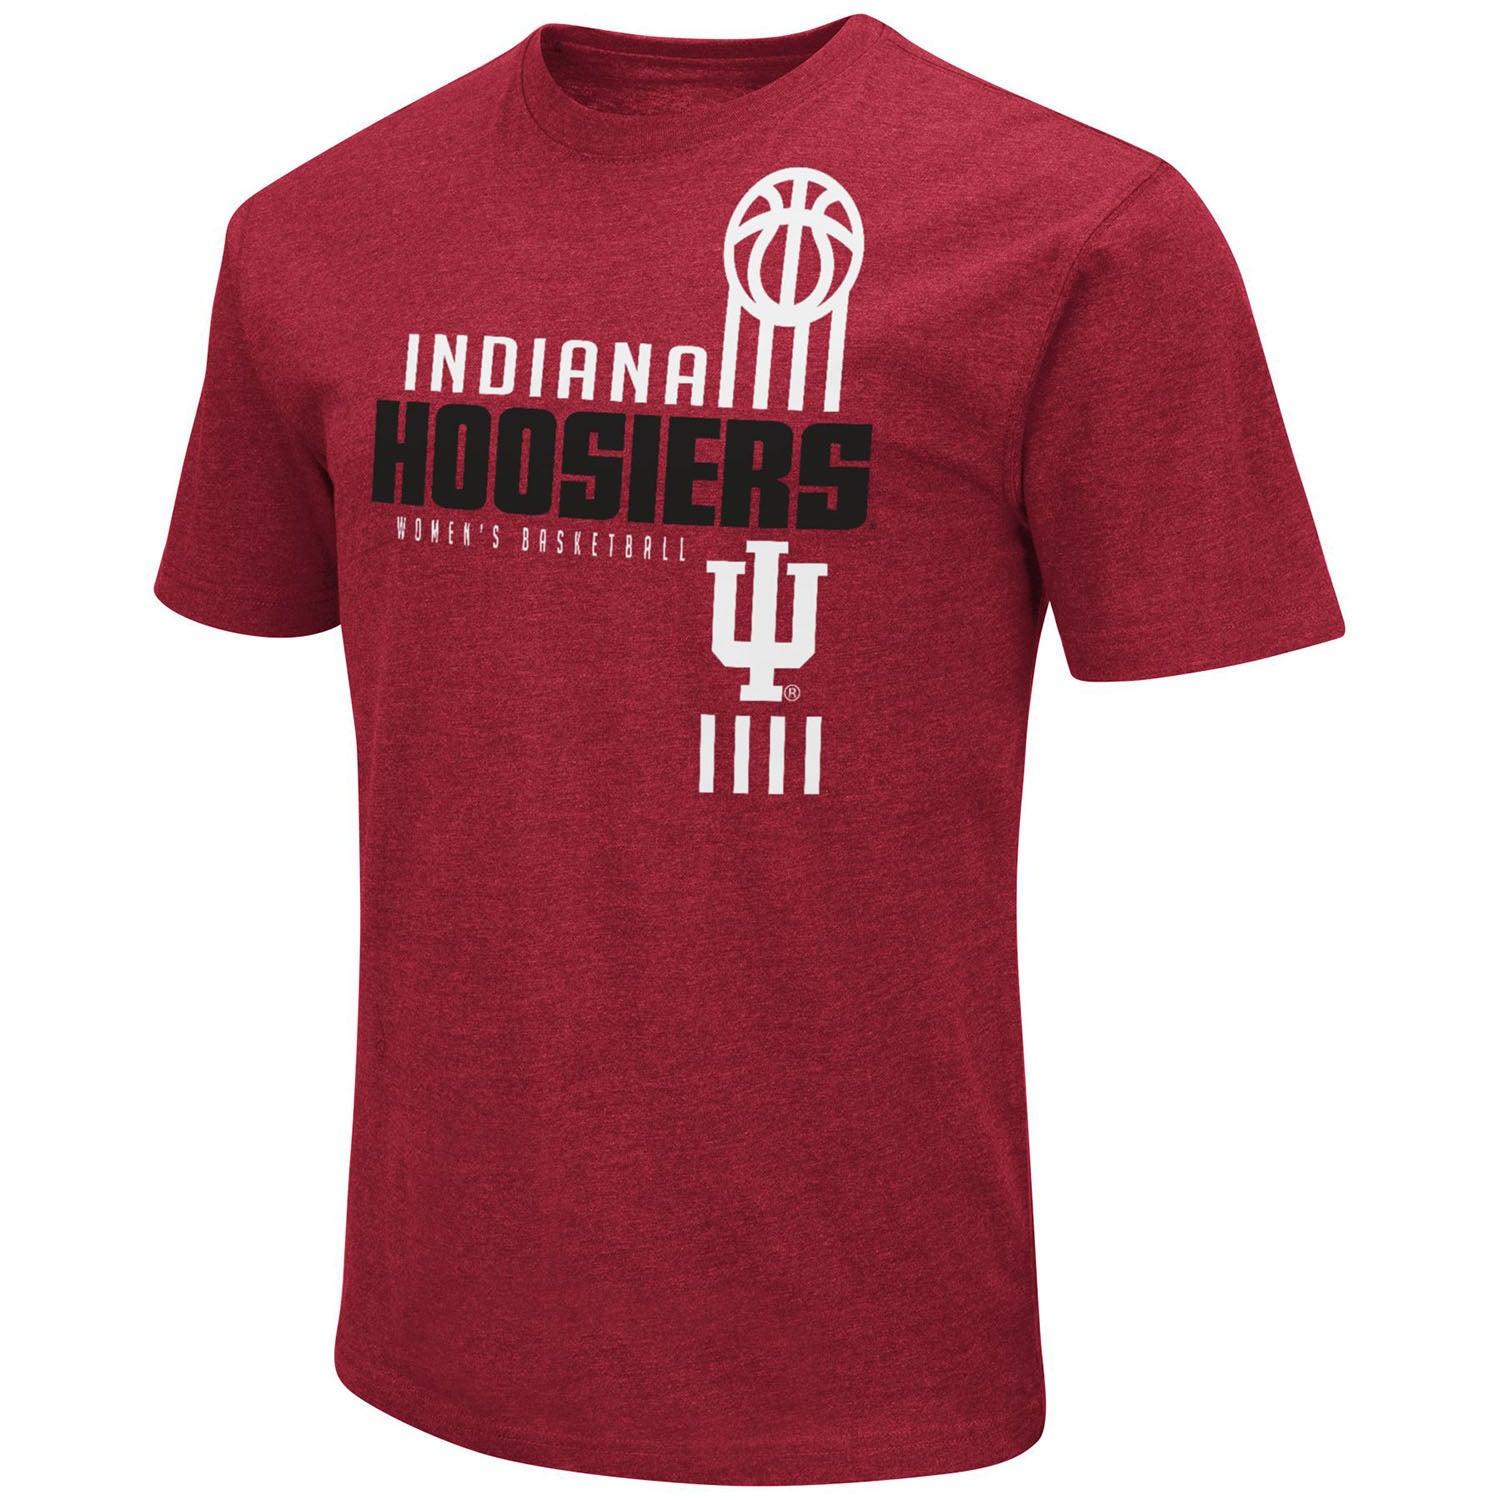 Indiana Hoosiers Women's Basketball Playbook Long Sleeve White T-Shirt -  Official Indiana University Athletics Store